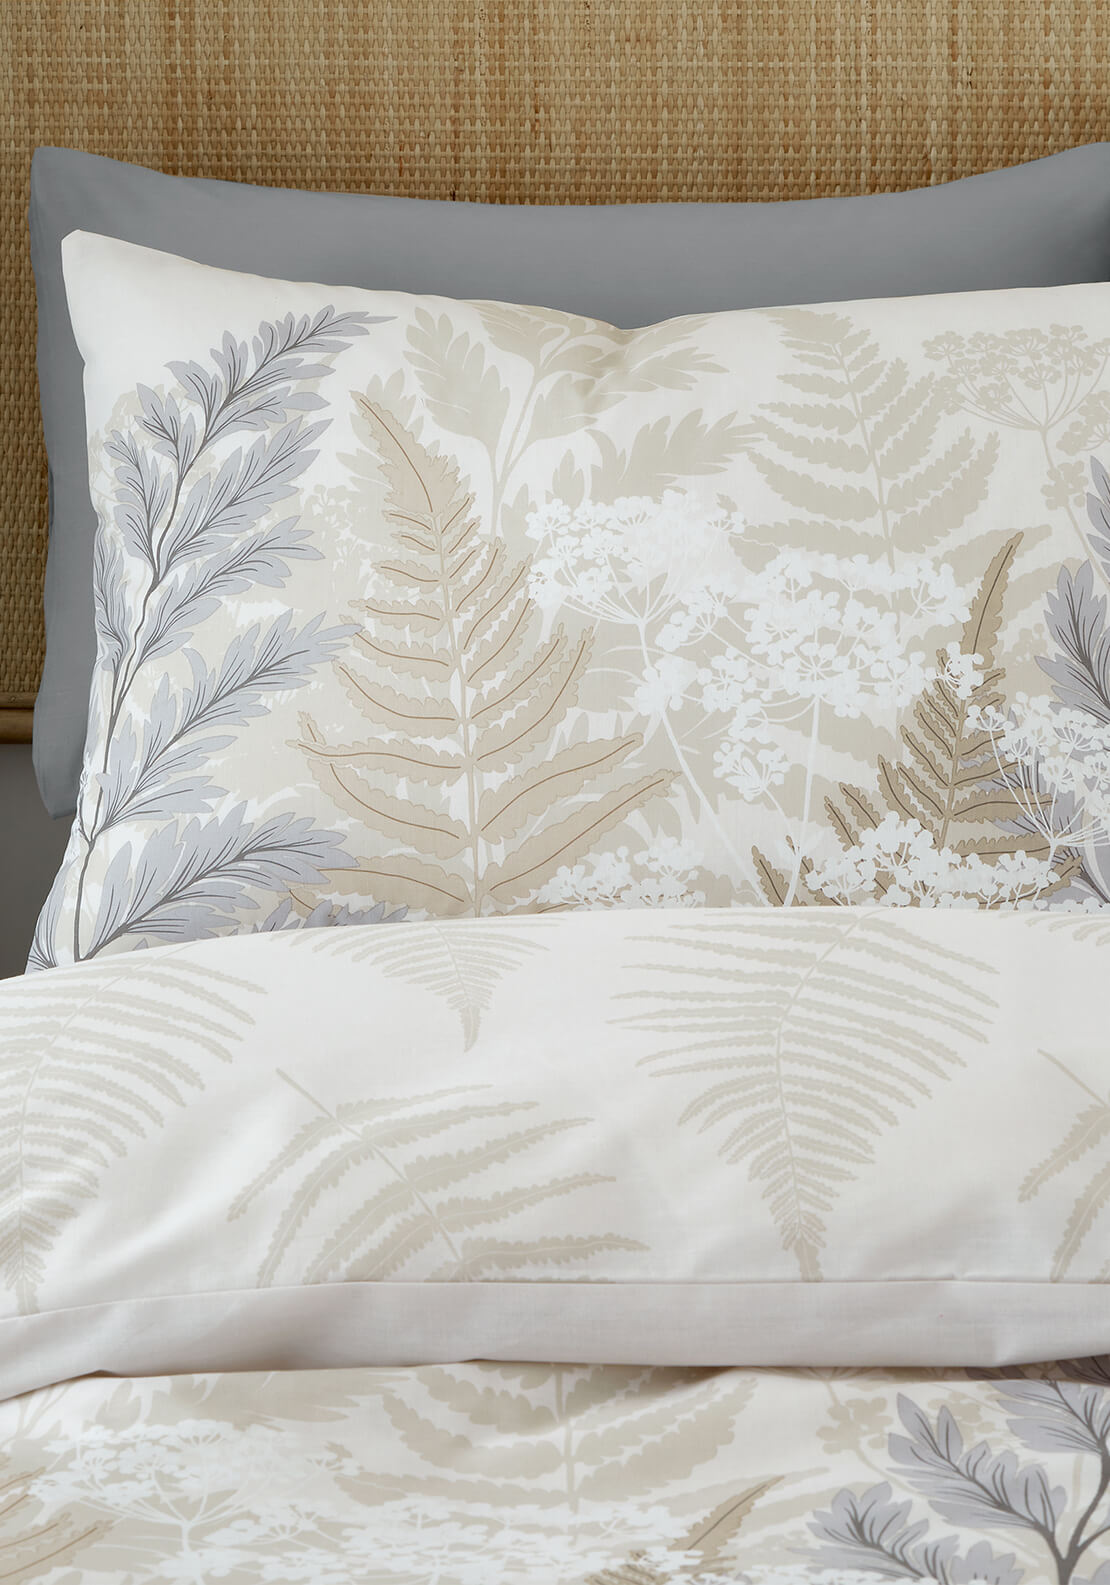  The Home Collection Botanical Fern Floral Reversible Duvet Cover Set - Natural 3 Shaws Department Stores